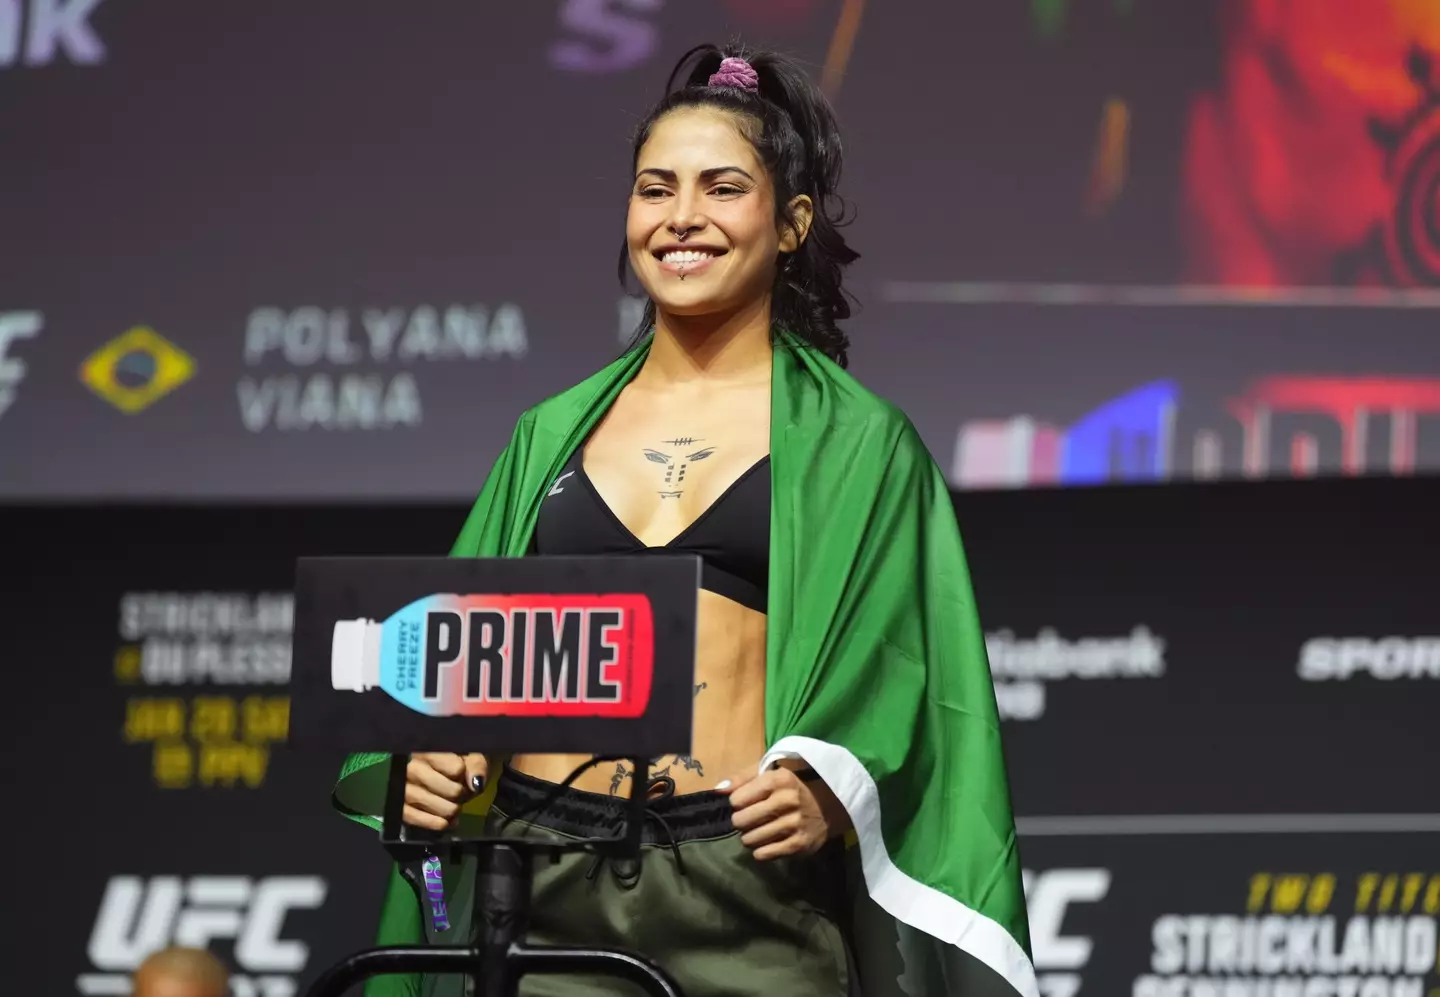 Polyana Viana weighs in ahead of her UFC 297 fight. Image: Getty 